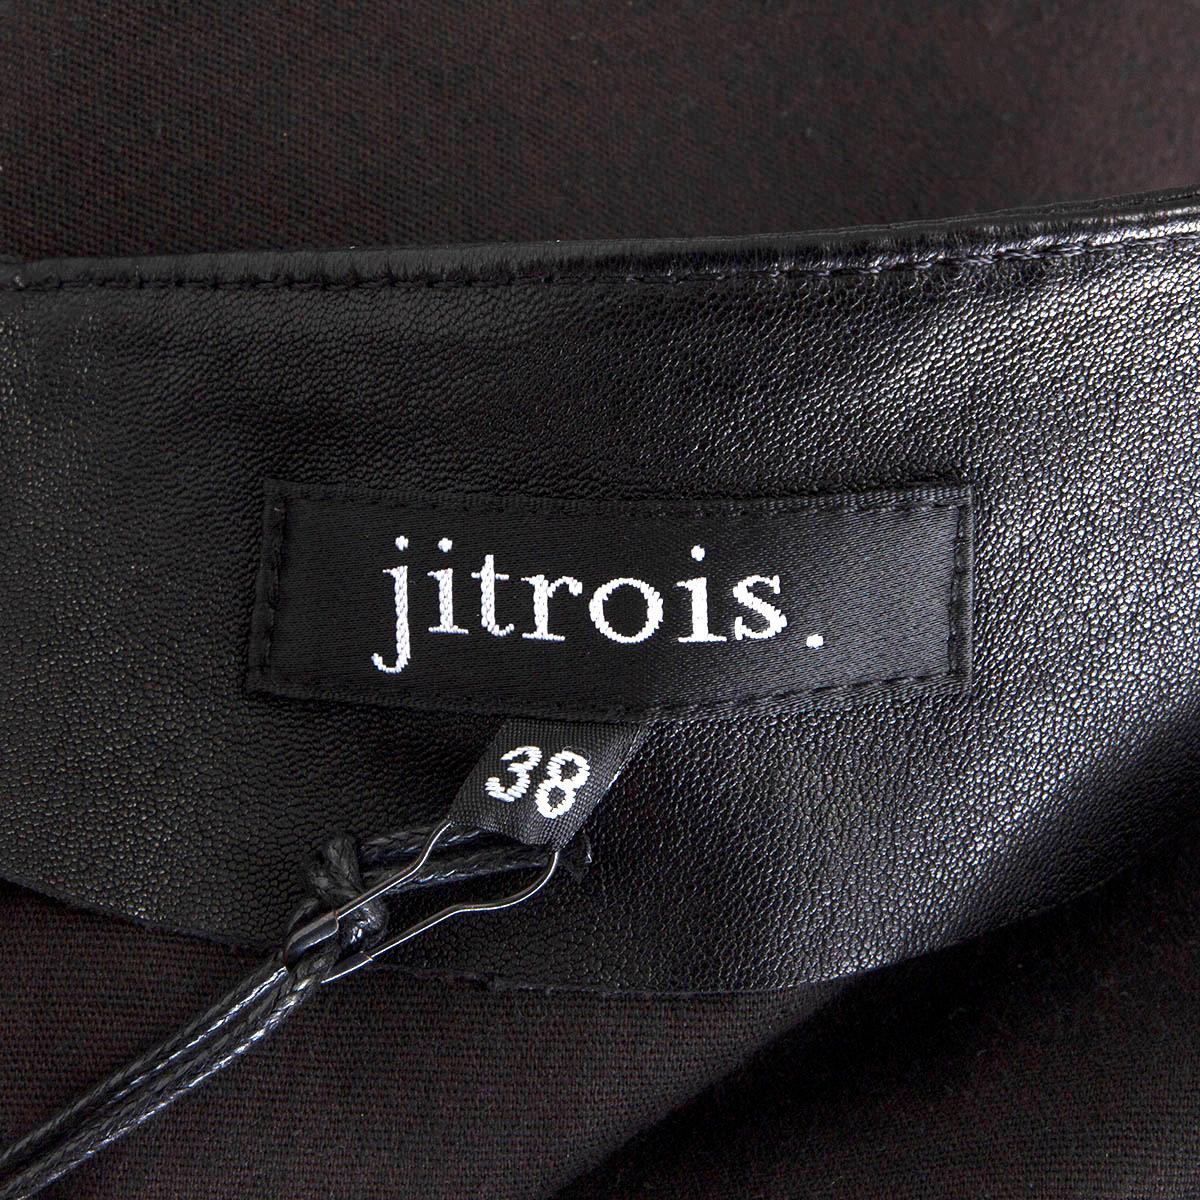 JITROIS black SLIM LEATHER LEGGINGS Pants 38 S In Excellent Condition For Sale In Zürich, CH